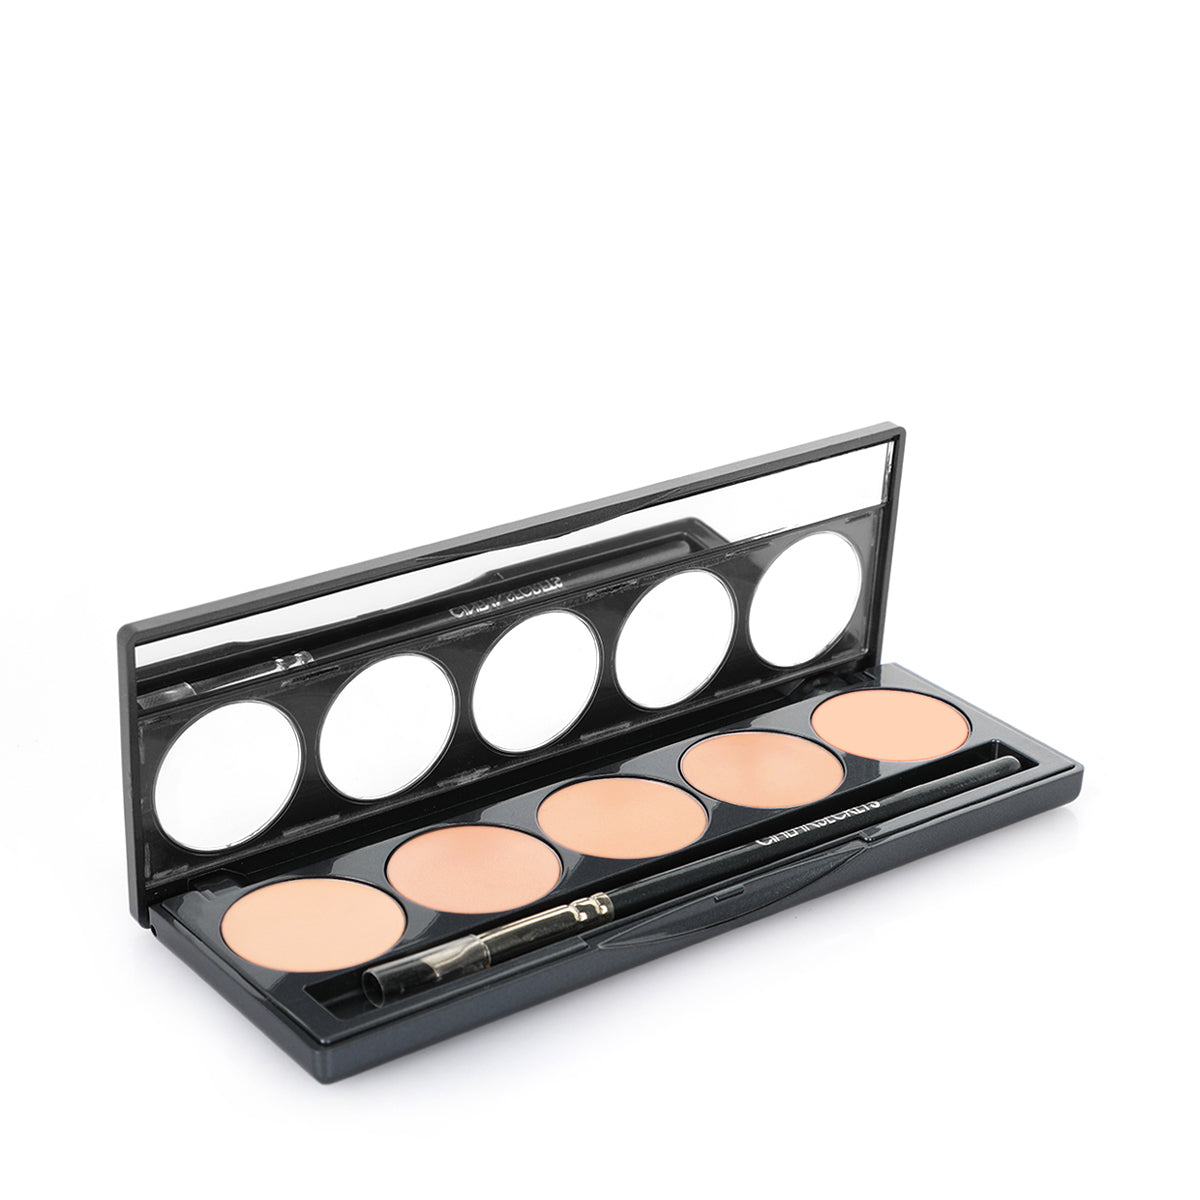 Ultimate Foundation 5-In-1 Pro Palette 500A Series